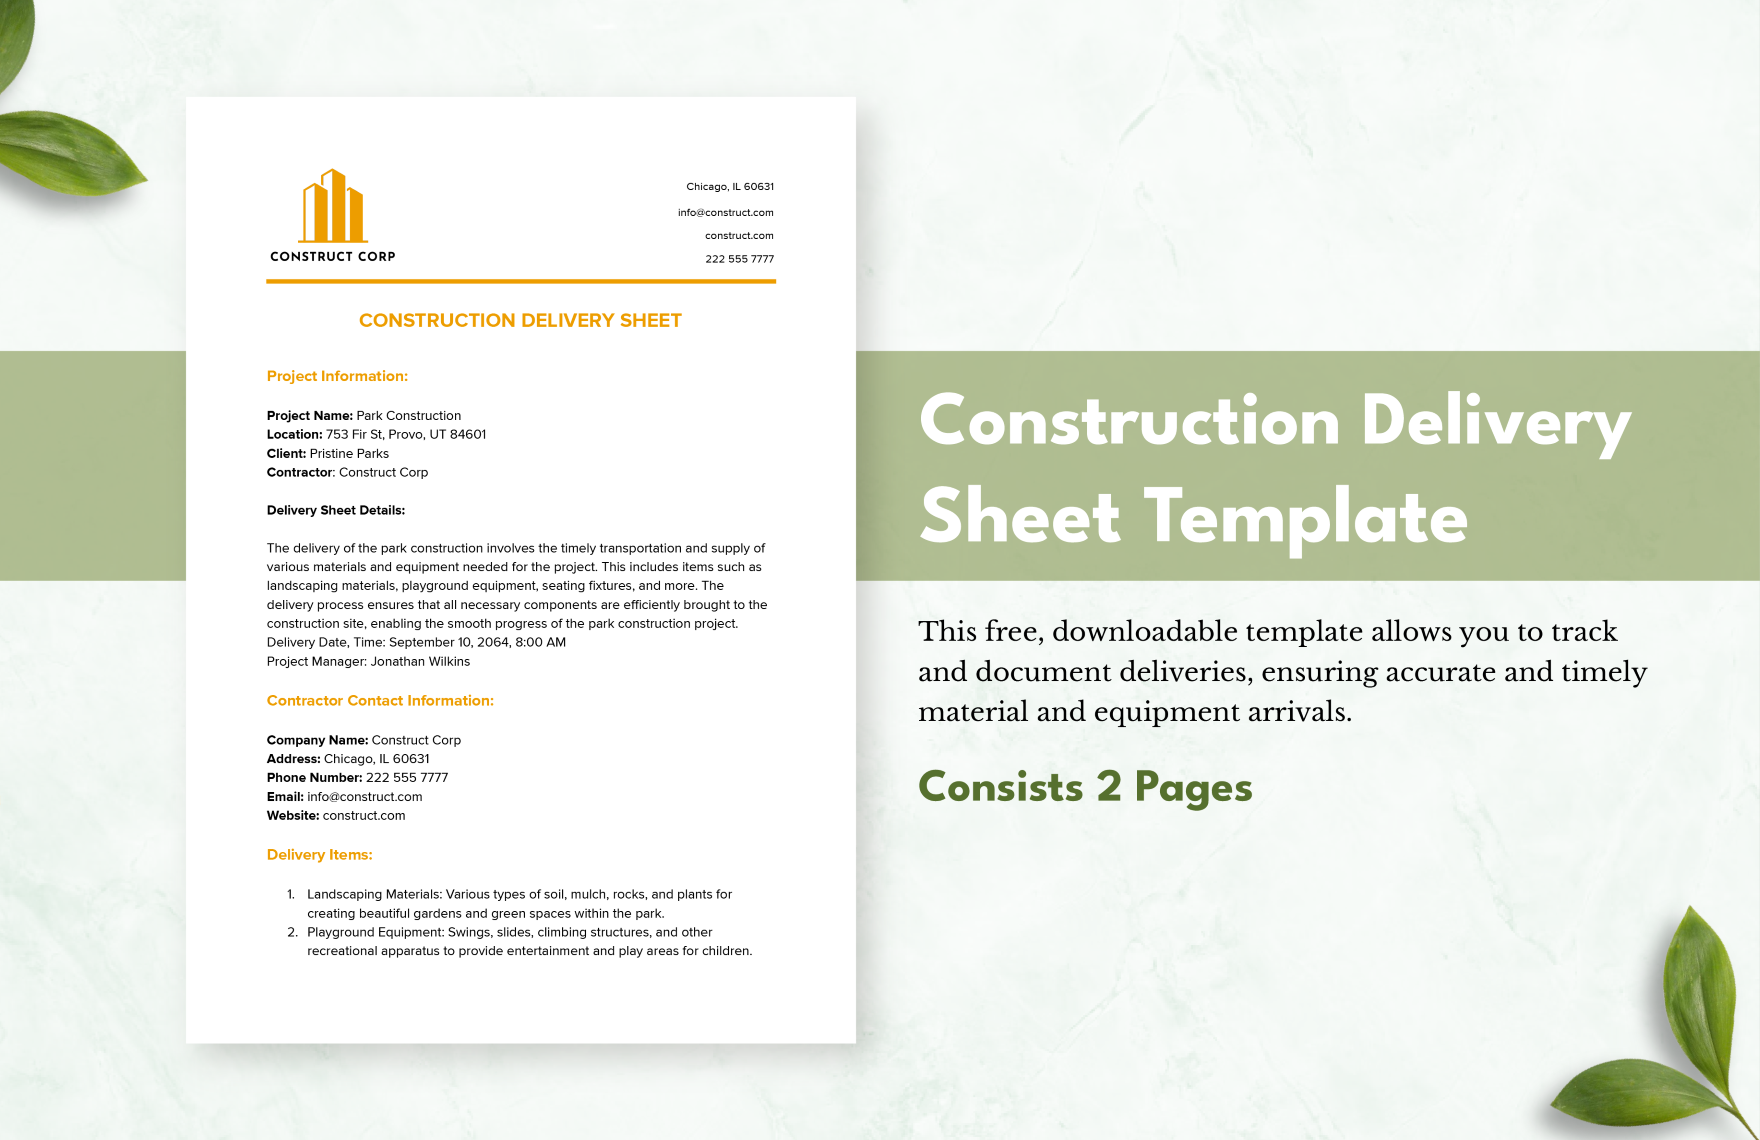 Construction Delivery Sheet Template